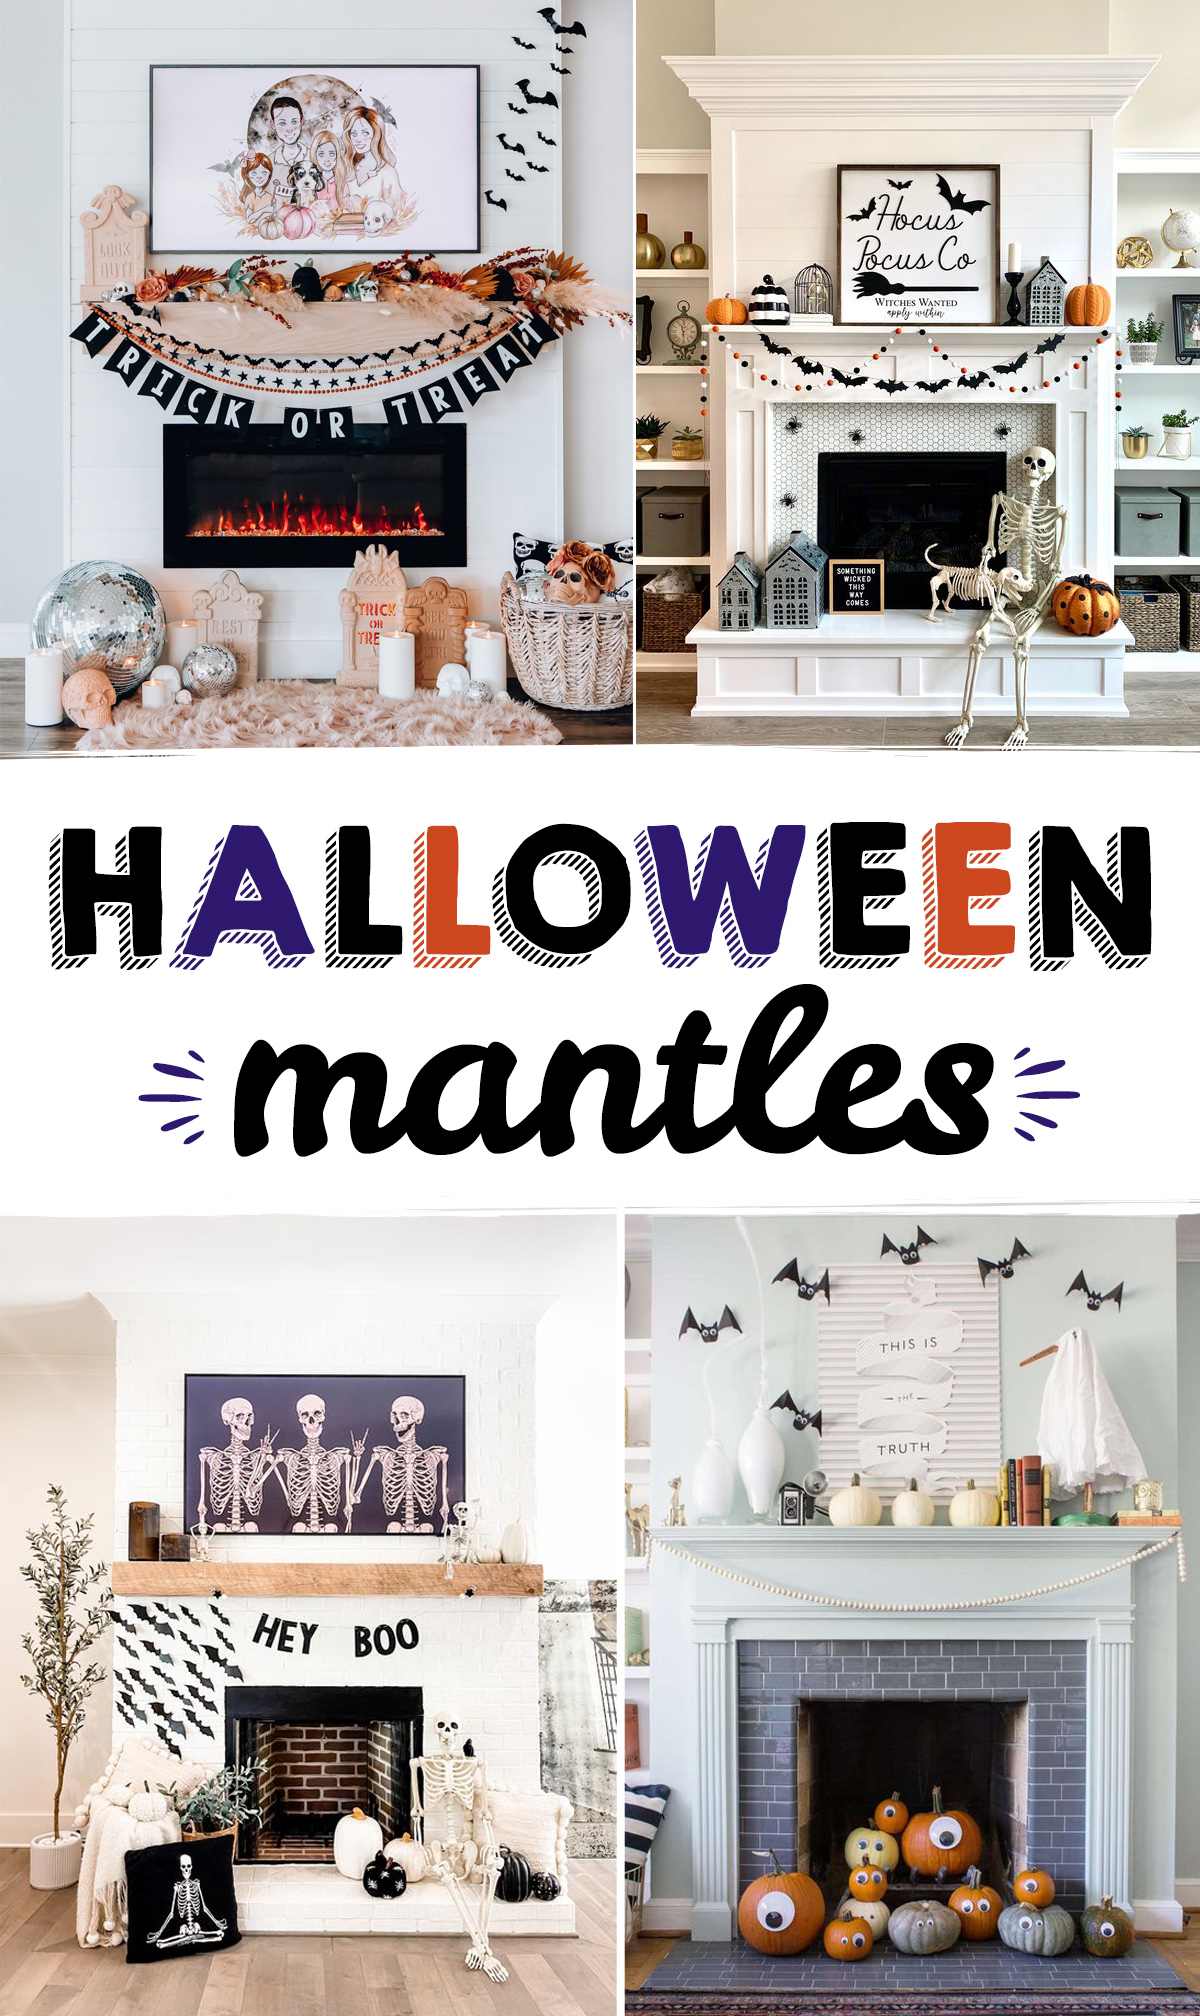 Halloween Mantle Decor - Fun ideas for everything from spooky and creepy to fun and colorful. There's an idea here for every style.